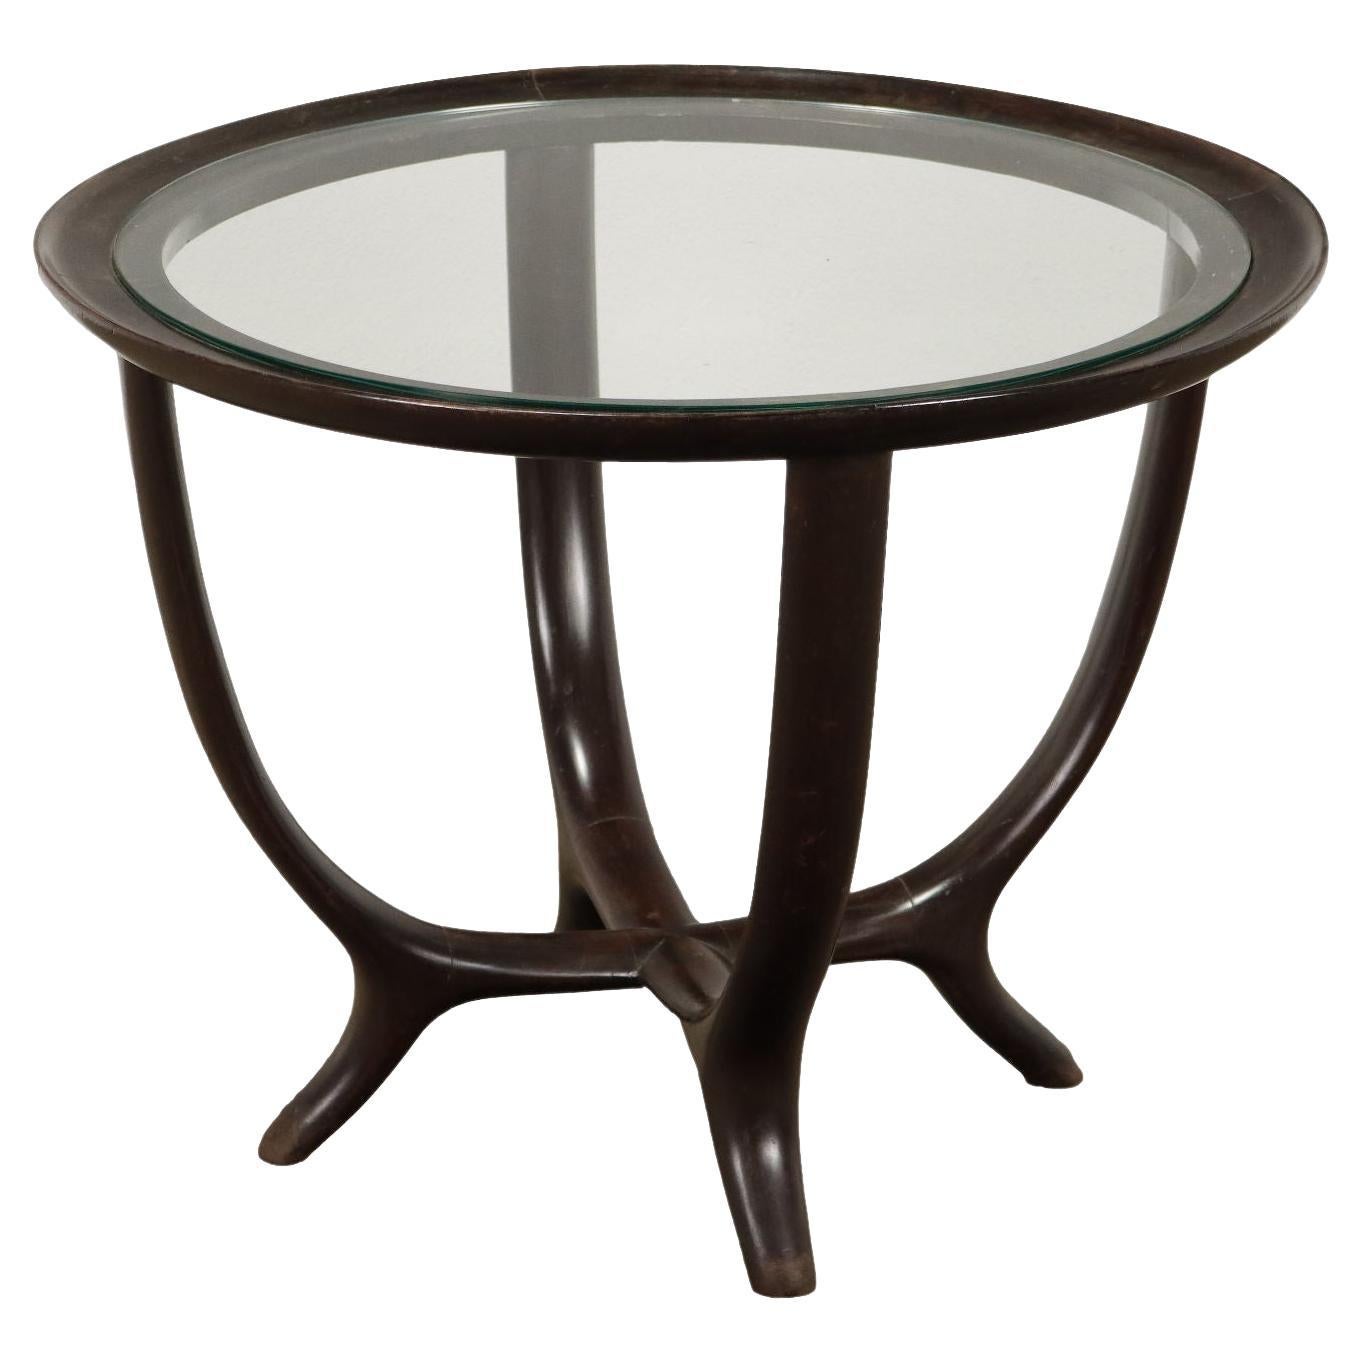 1950s coffee table in ebony-stained wood and glass For Sale